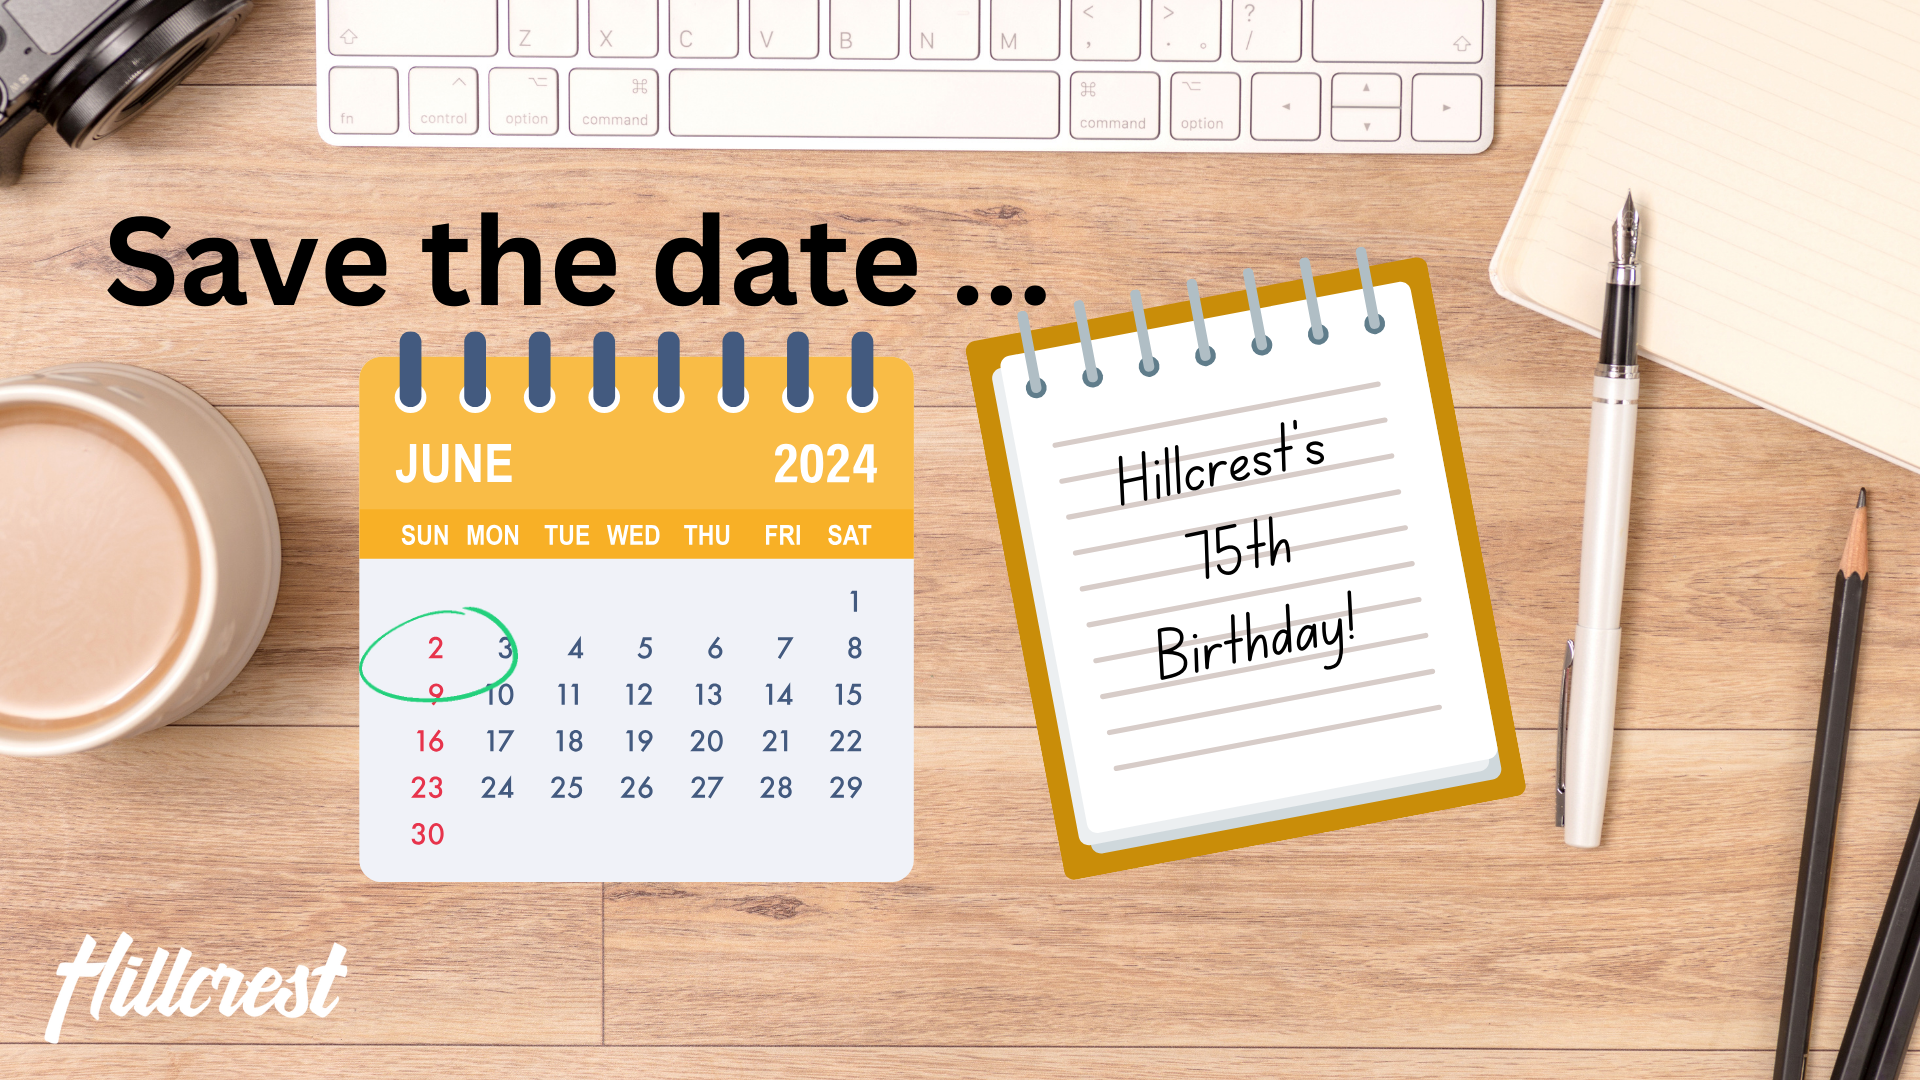 75th Birthday Save the Date.png